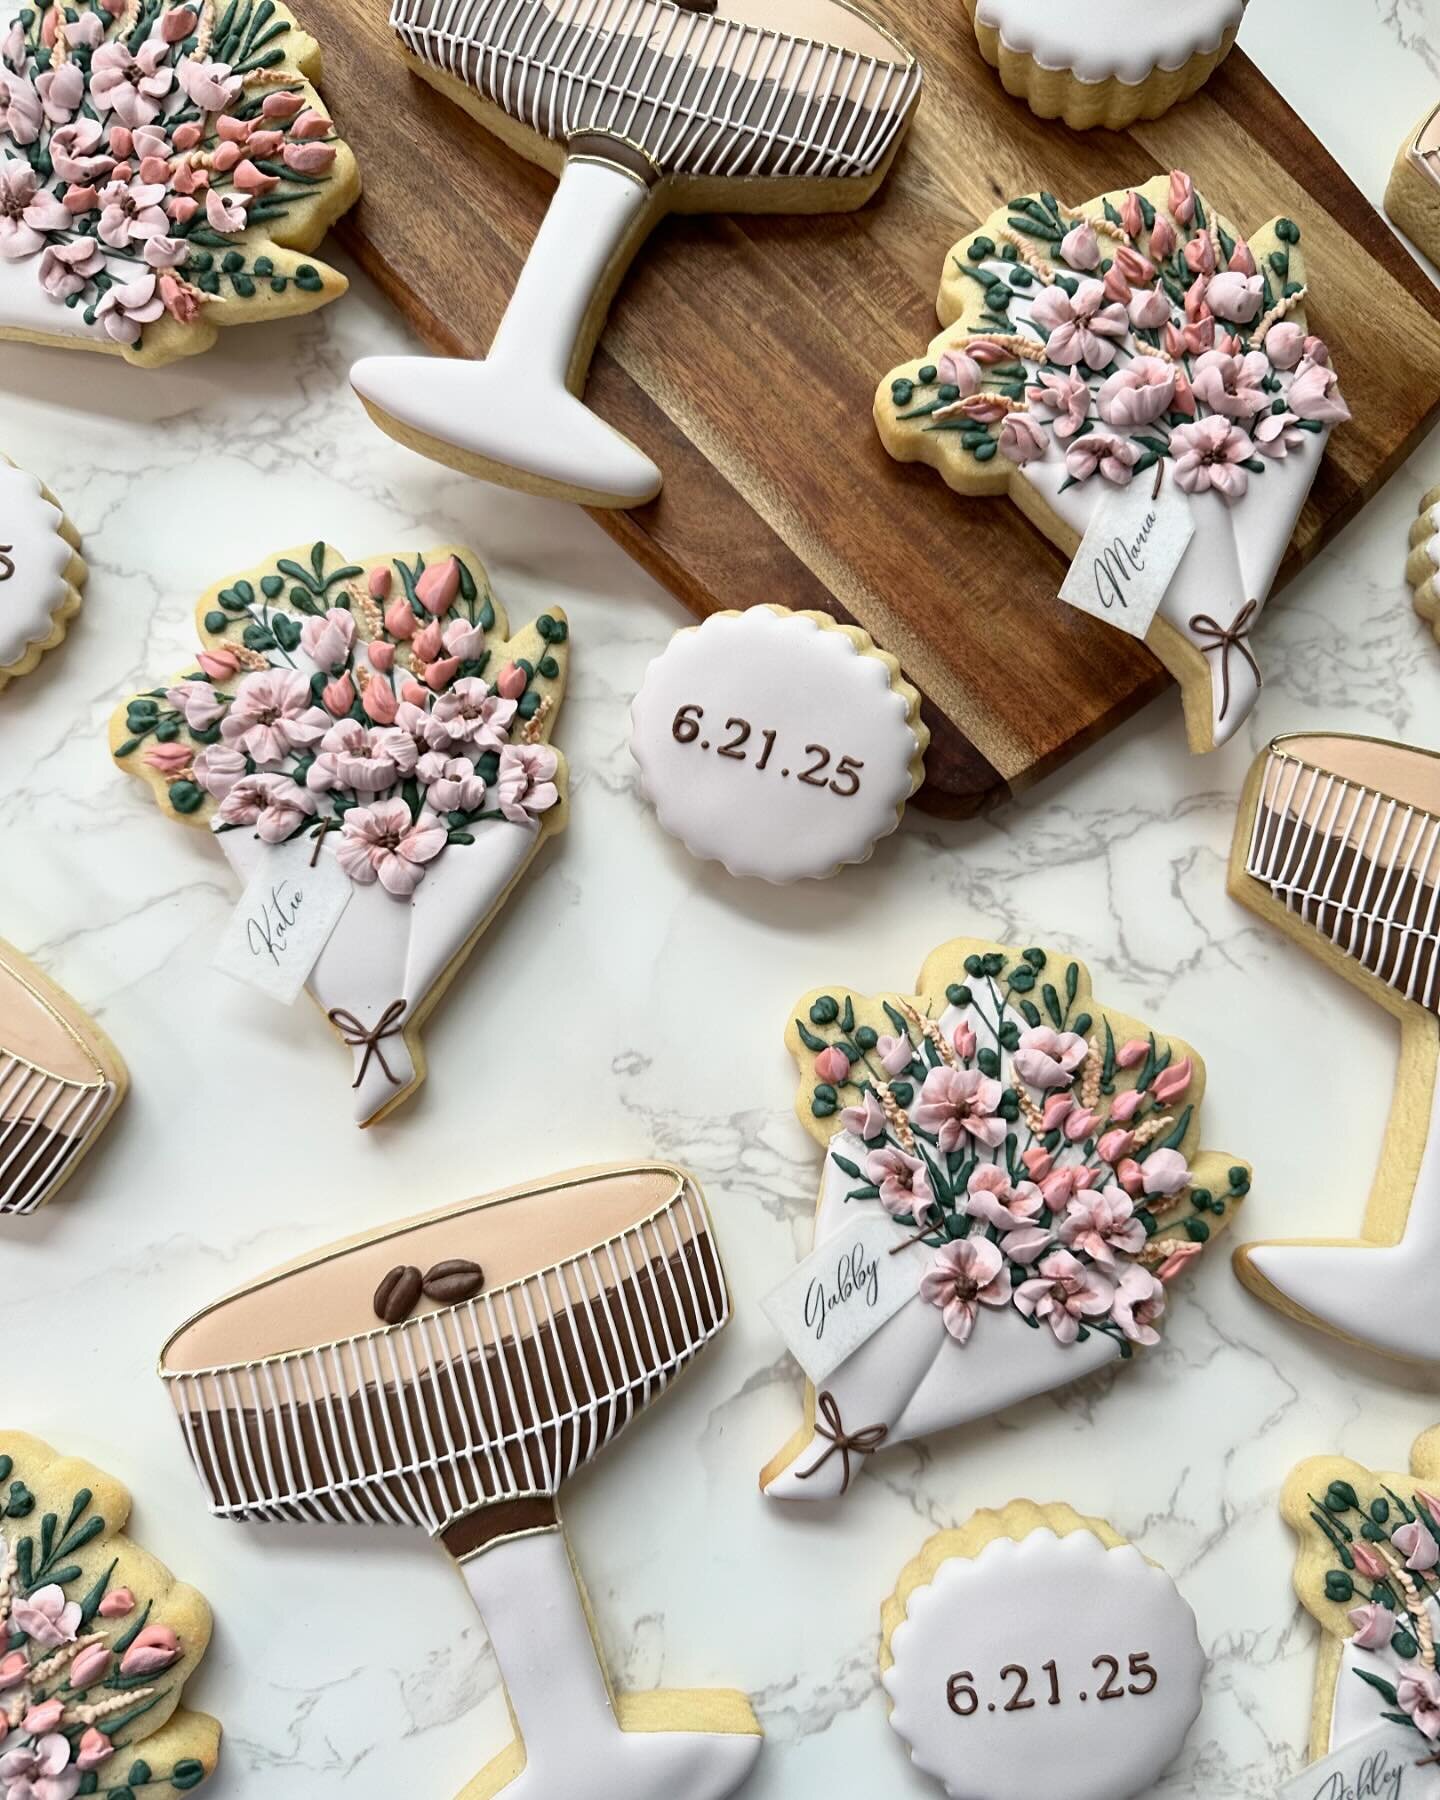 One of my OG and favorite clients, Jess, had the vision for espresso martini themed wedding party proposal cookies.

After looking at lots of inspo, we nailed down the idea of these three cookies. Originally, we planned to place florals on the date c